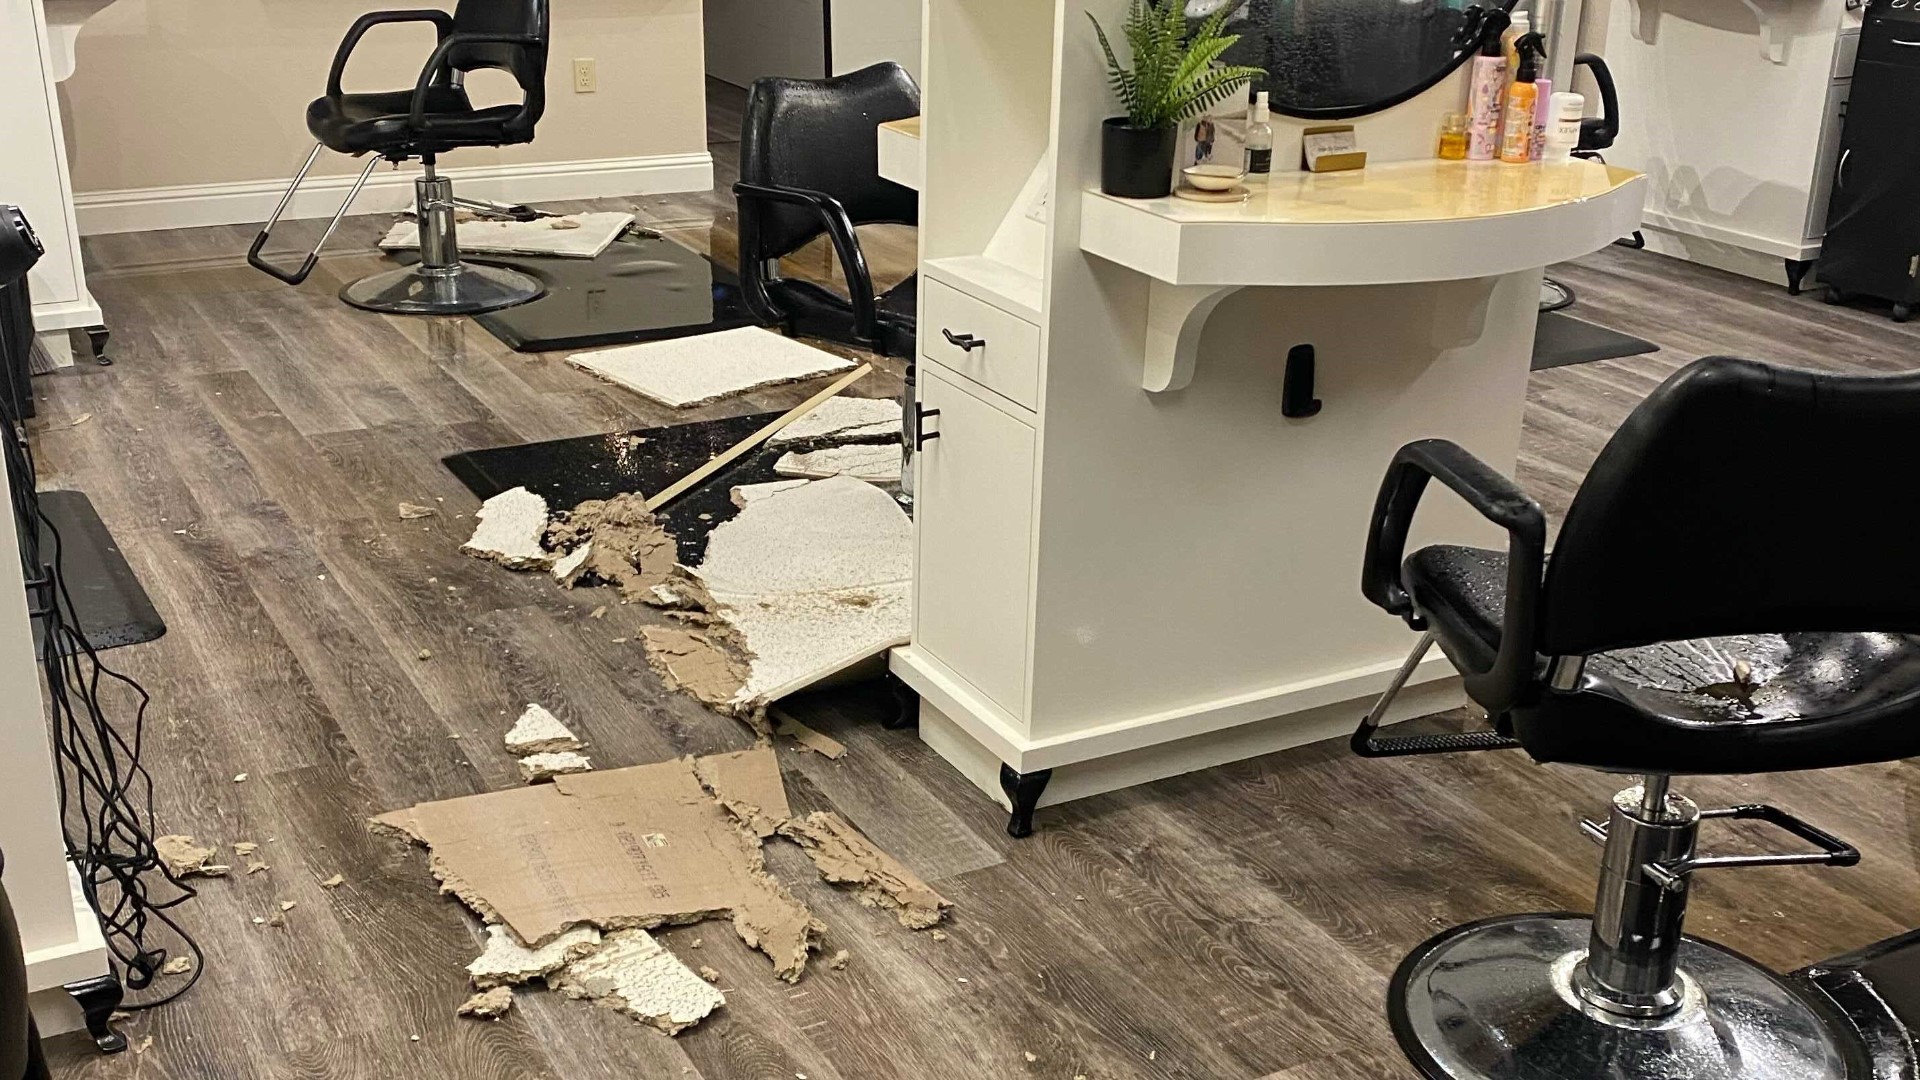 Winds took the roof off a salon in Ripon during a winter storm, flooding it and forcing it to close for up to three weeks after finally being allowed to reopen.